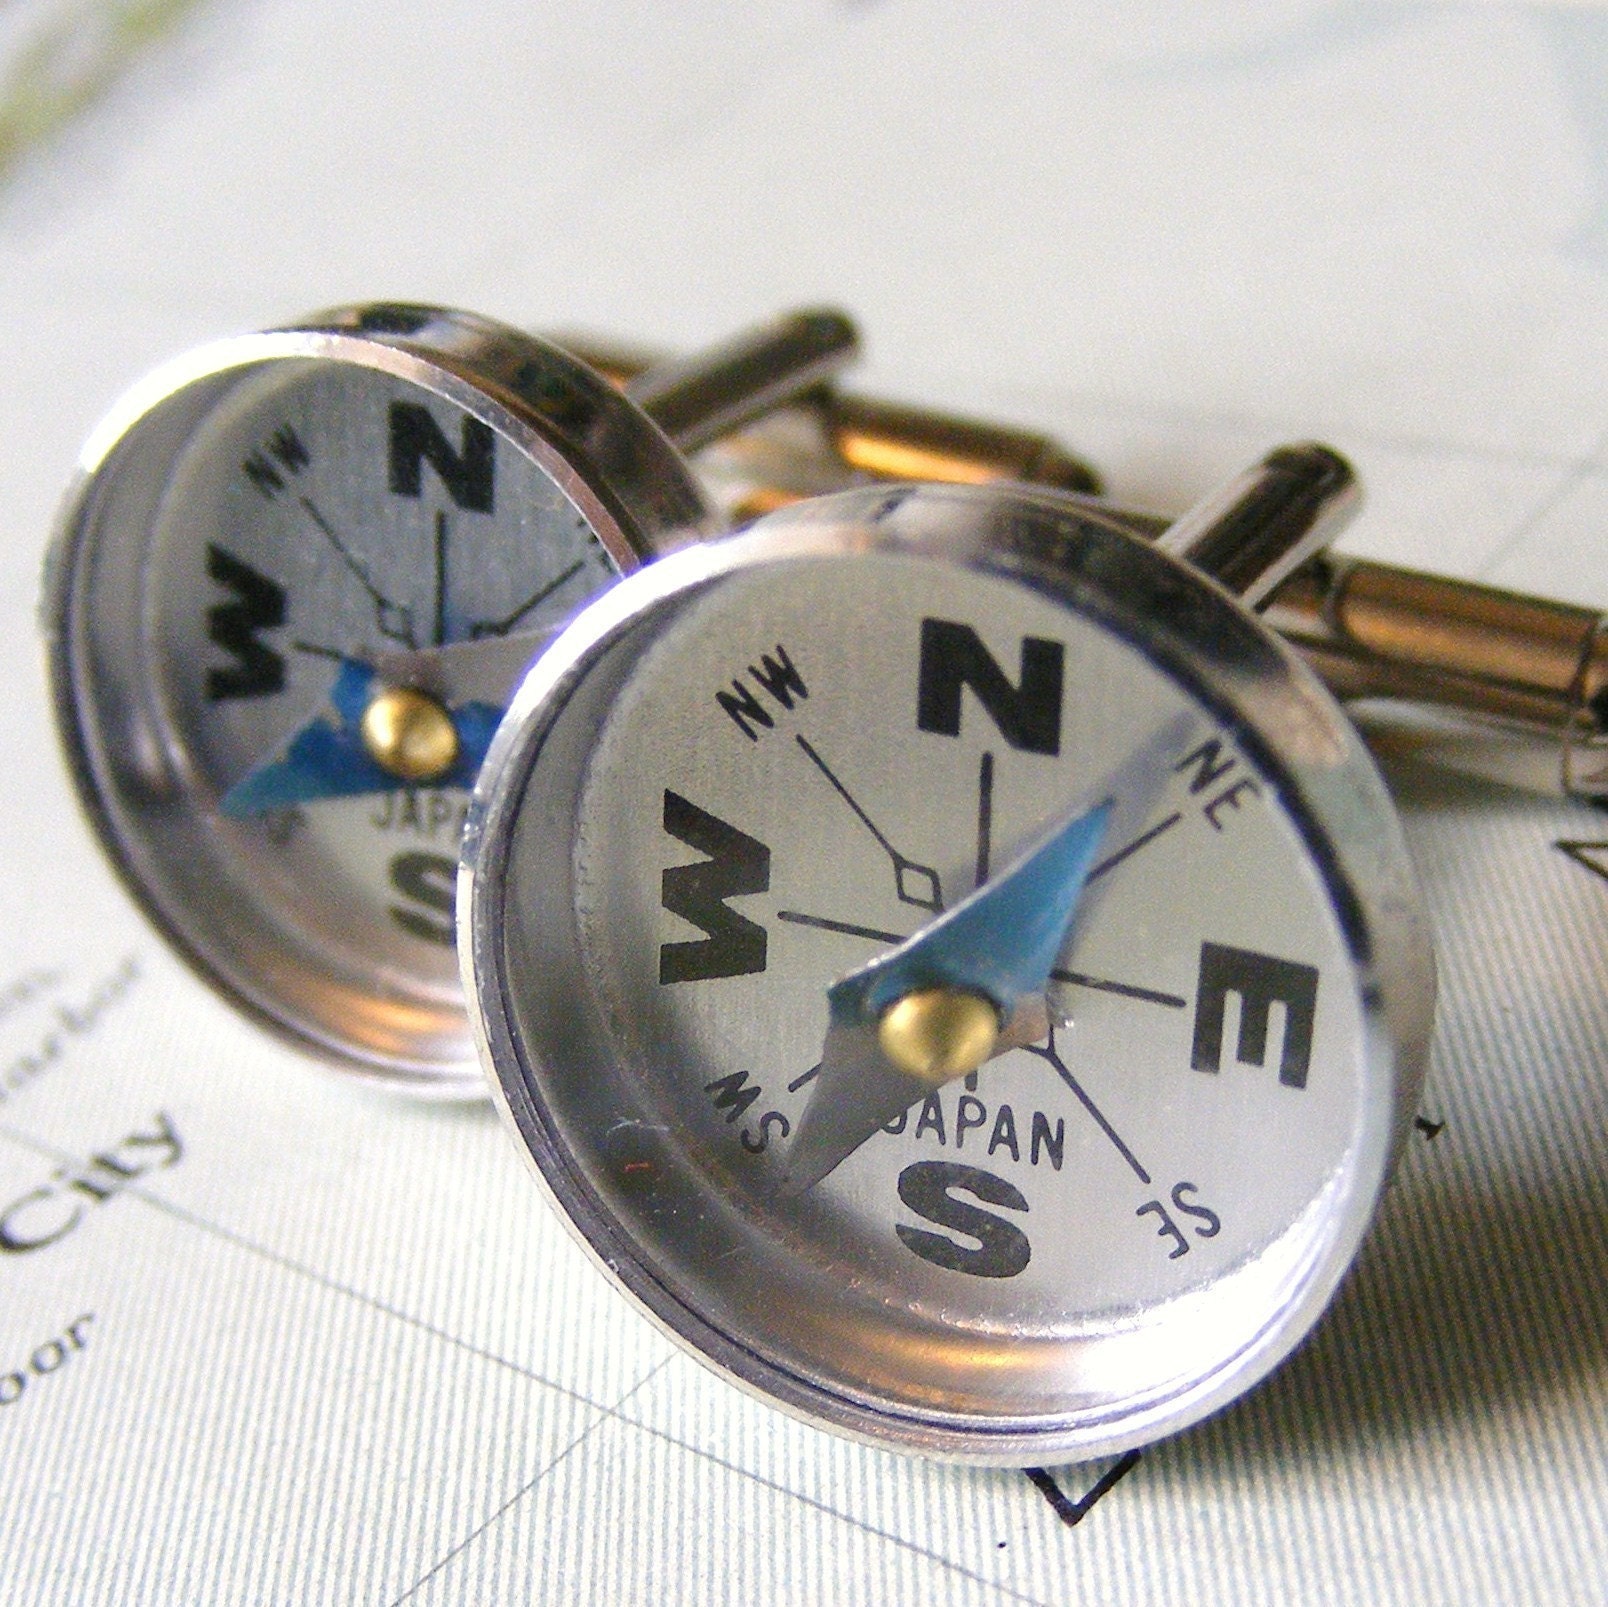 ON YOUR WAY compass cuff links